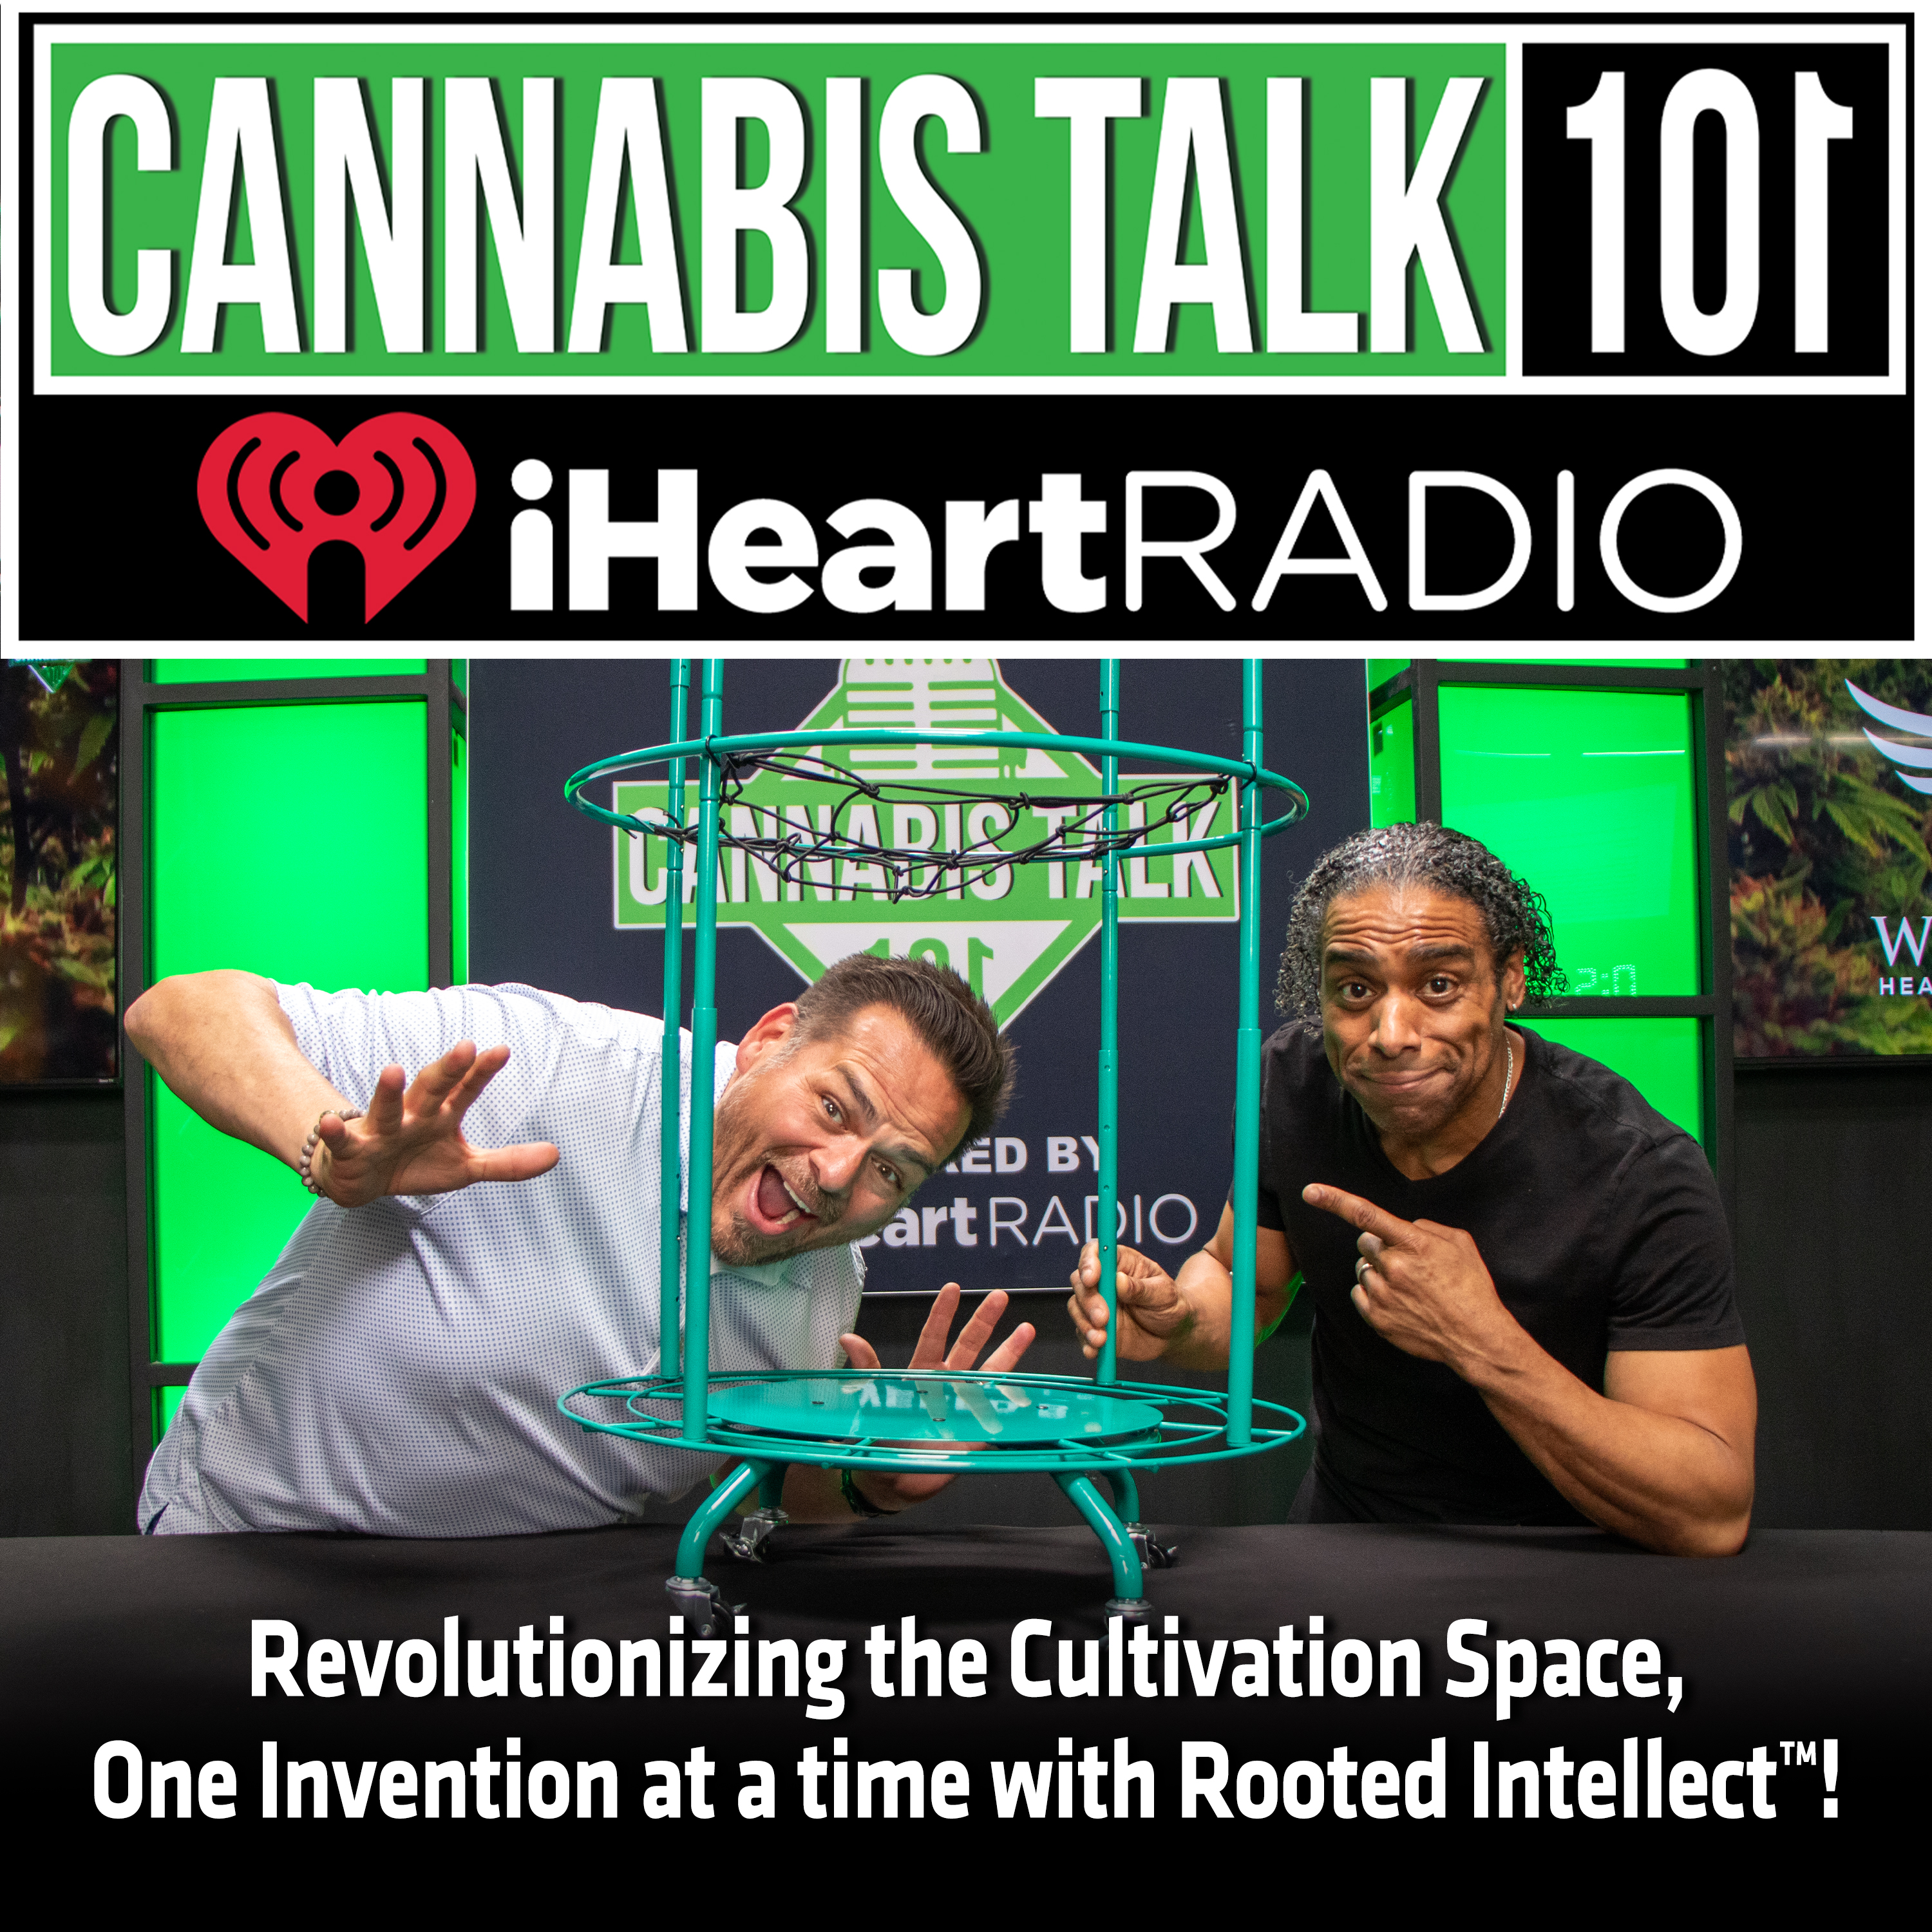 Revolutionizing the Cultivation Space, One Invention at a time with Rooted Intellect™!